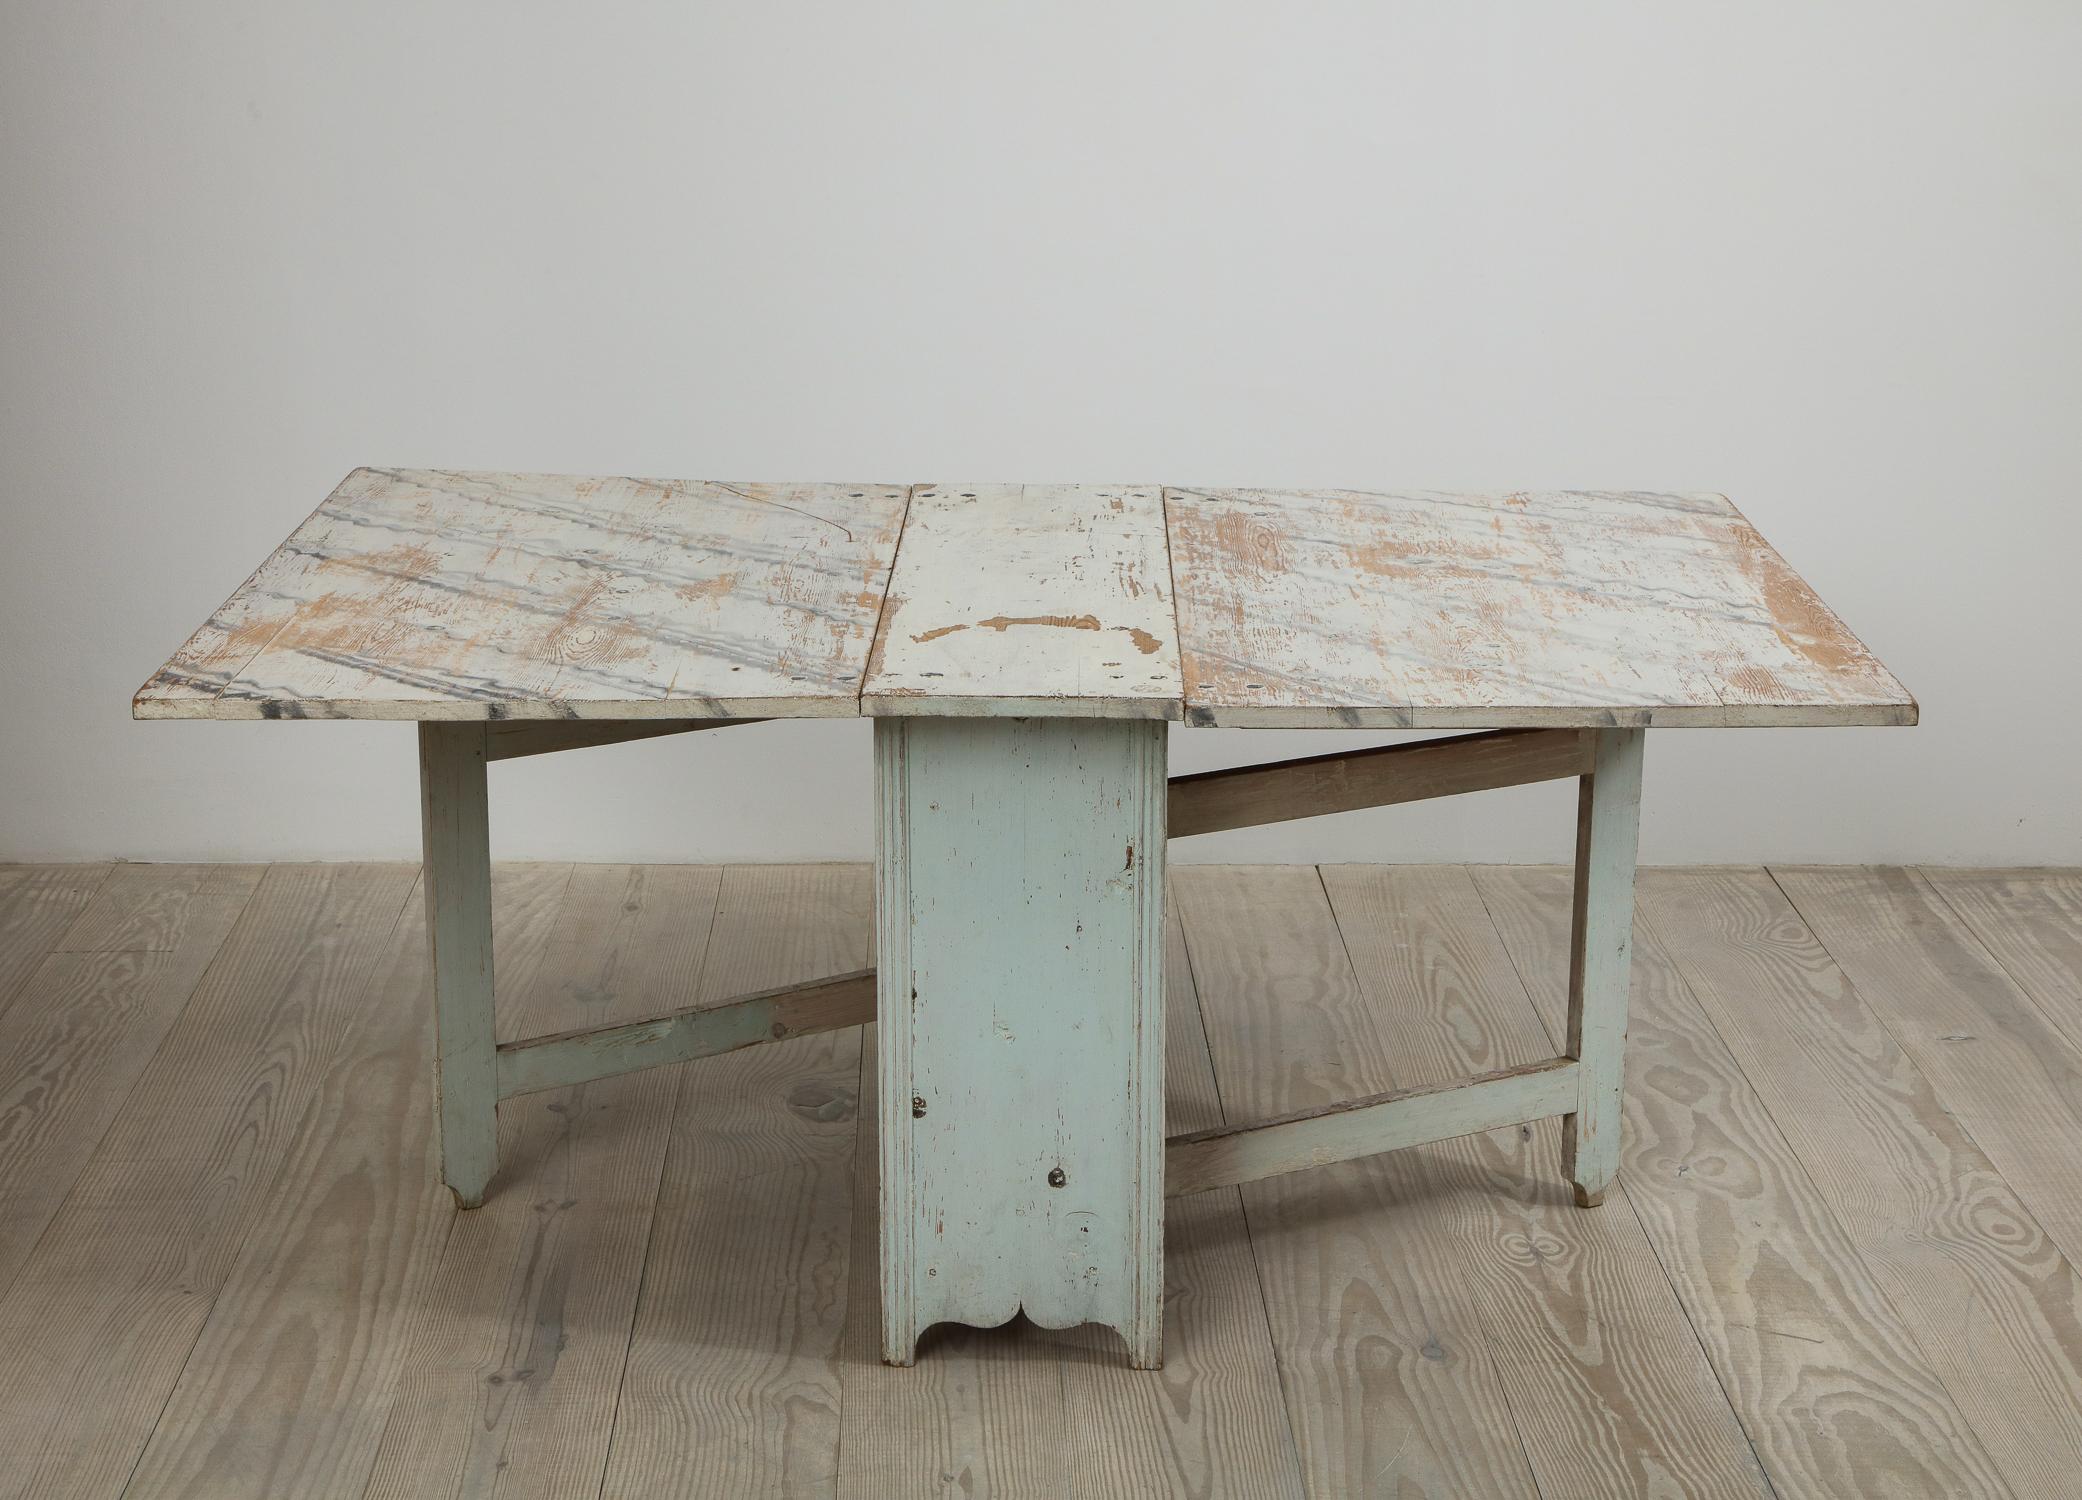 Hand-Painted Swedish Gustavian Drop-Leaf Table with Faux-Marble Finish, Sweden, Circa 1775